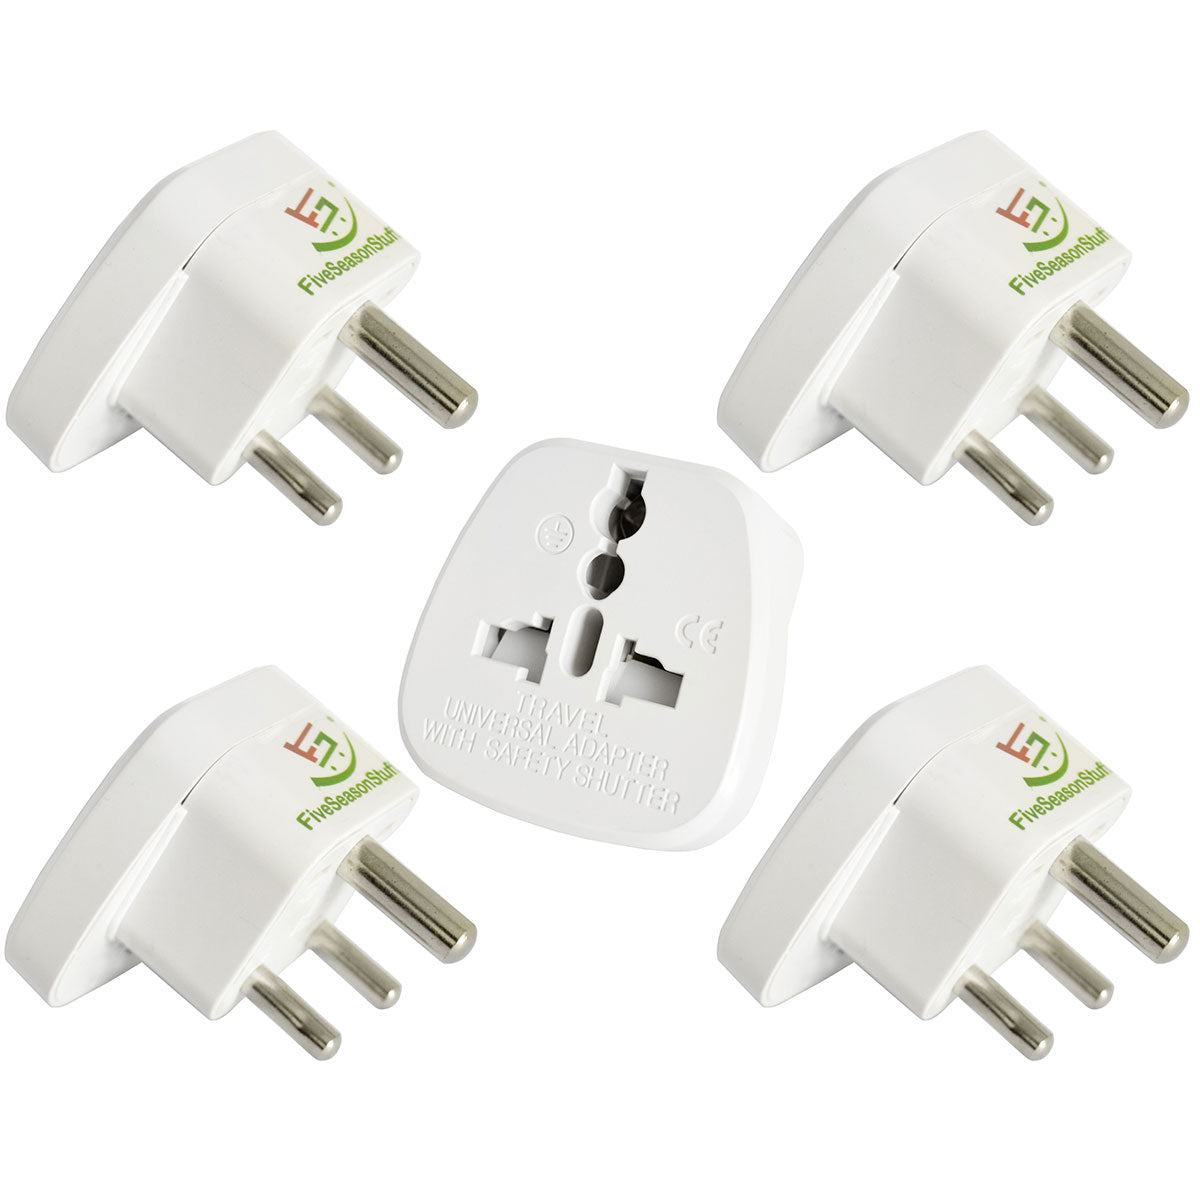 5 Travel Adapters for Traveling to India (White) Type M